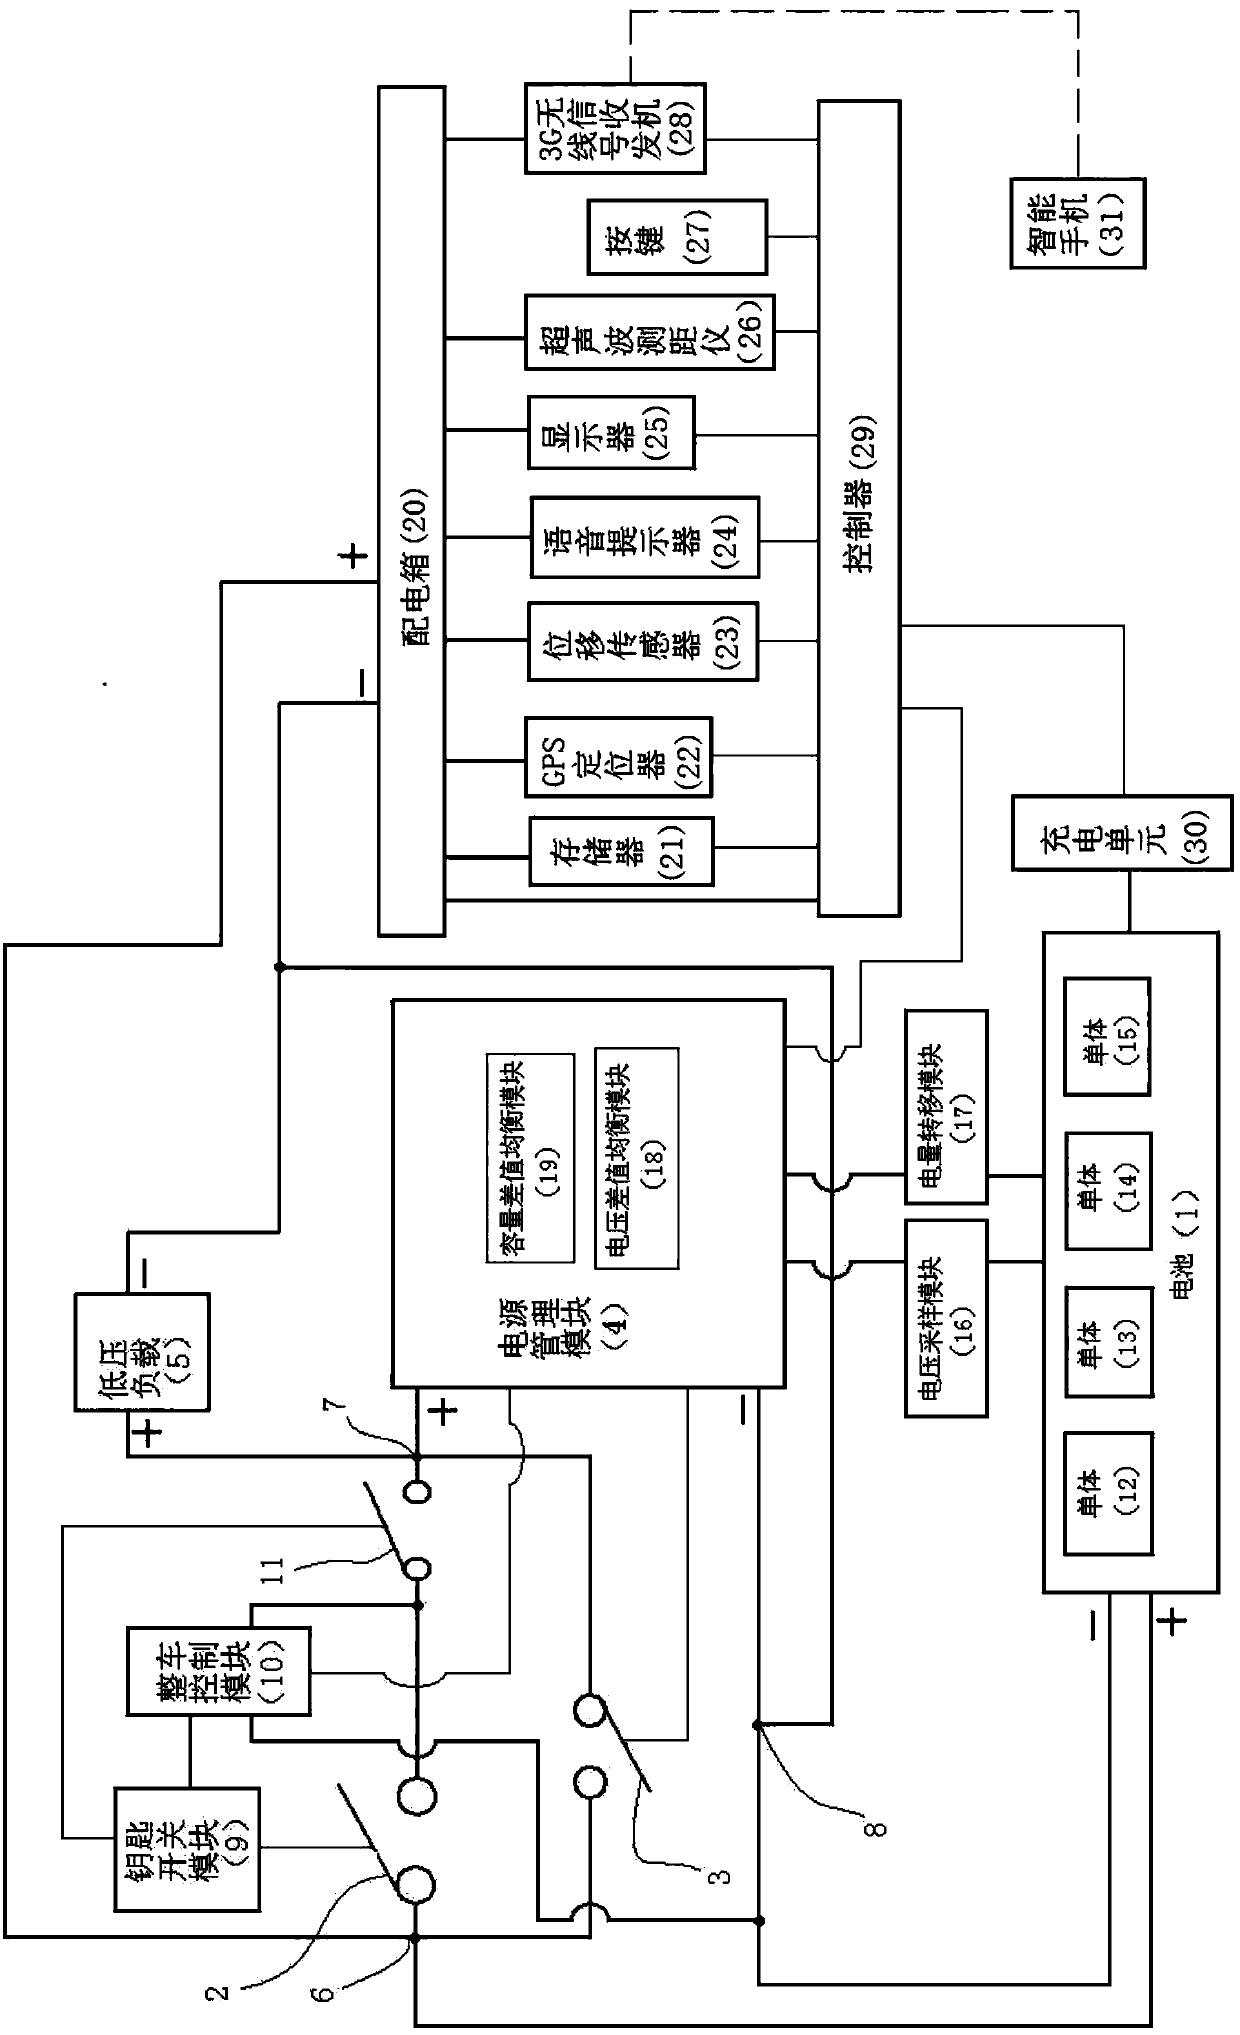 Vehicle-mounted Internet intelligent control system and control method thereof